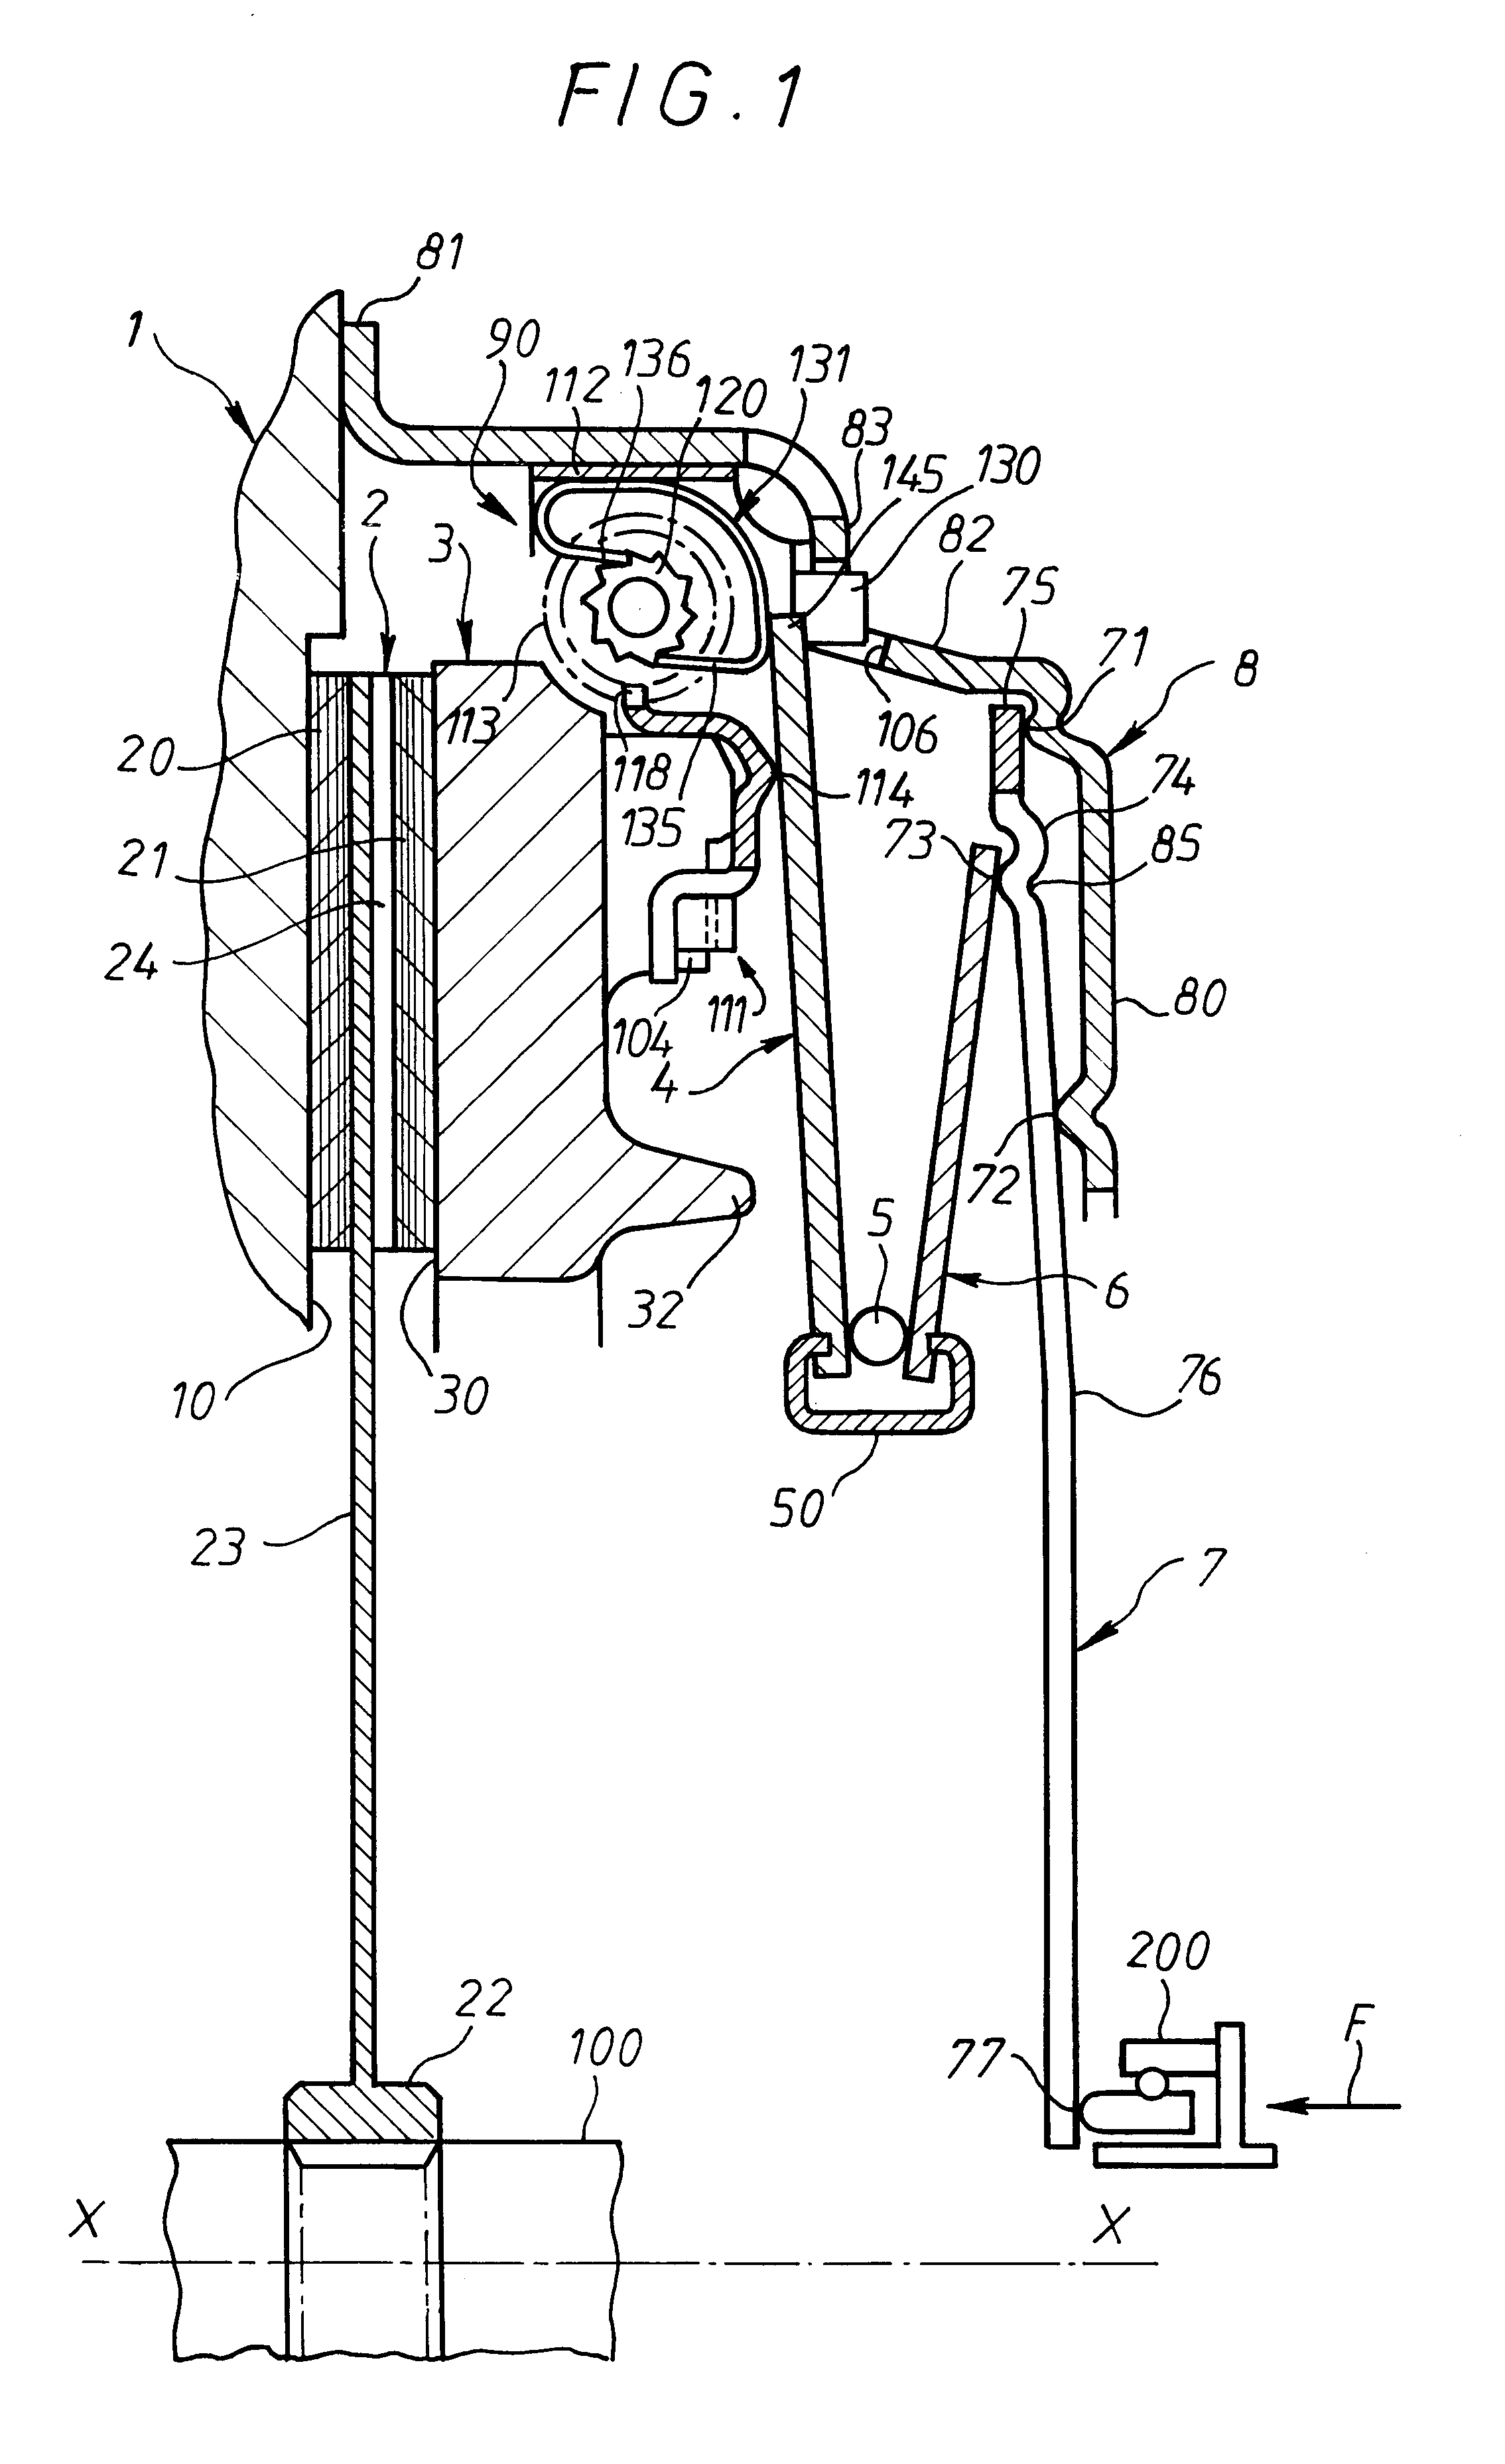 Friction clutch with low disengaging force